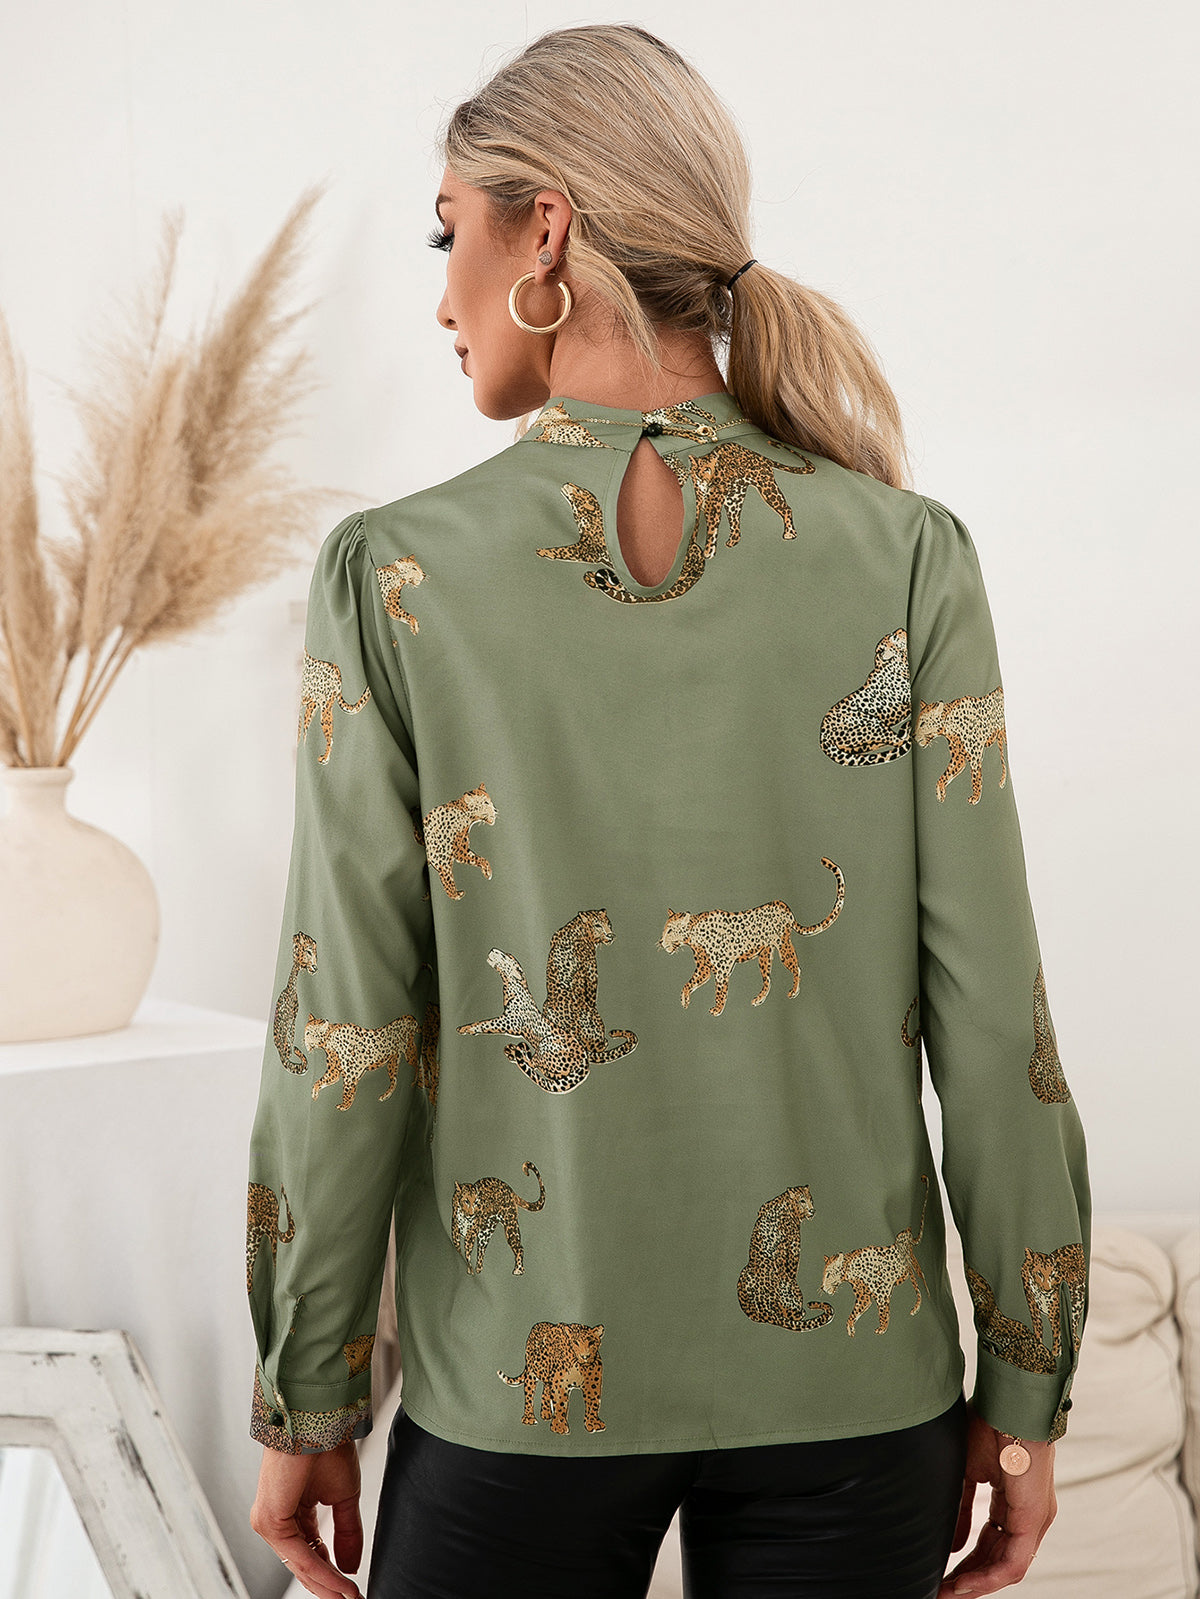 Call of the Wild Leopard Graphic Mock Neck Puff Sleeve Blouse